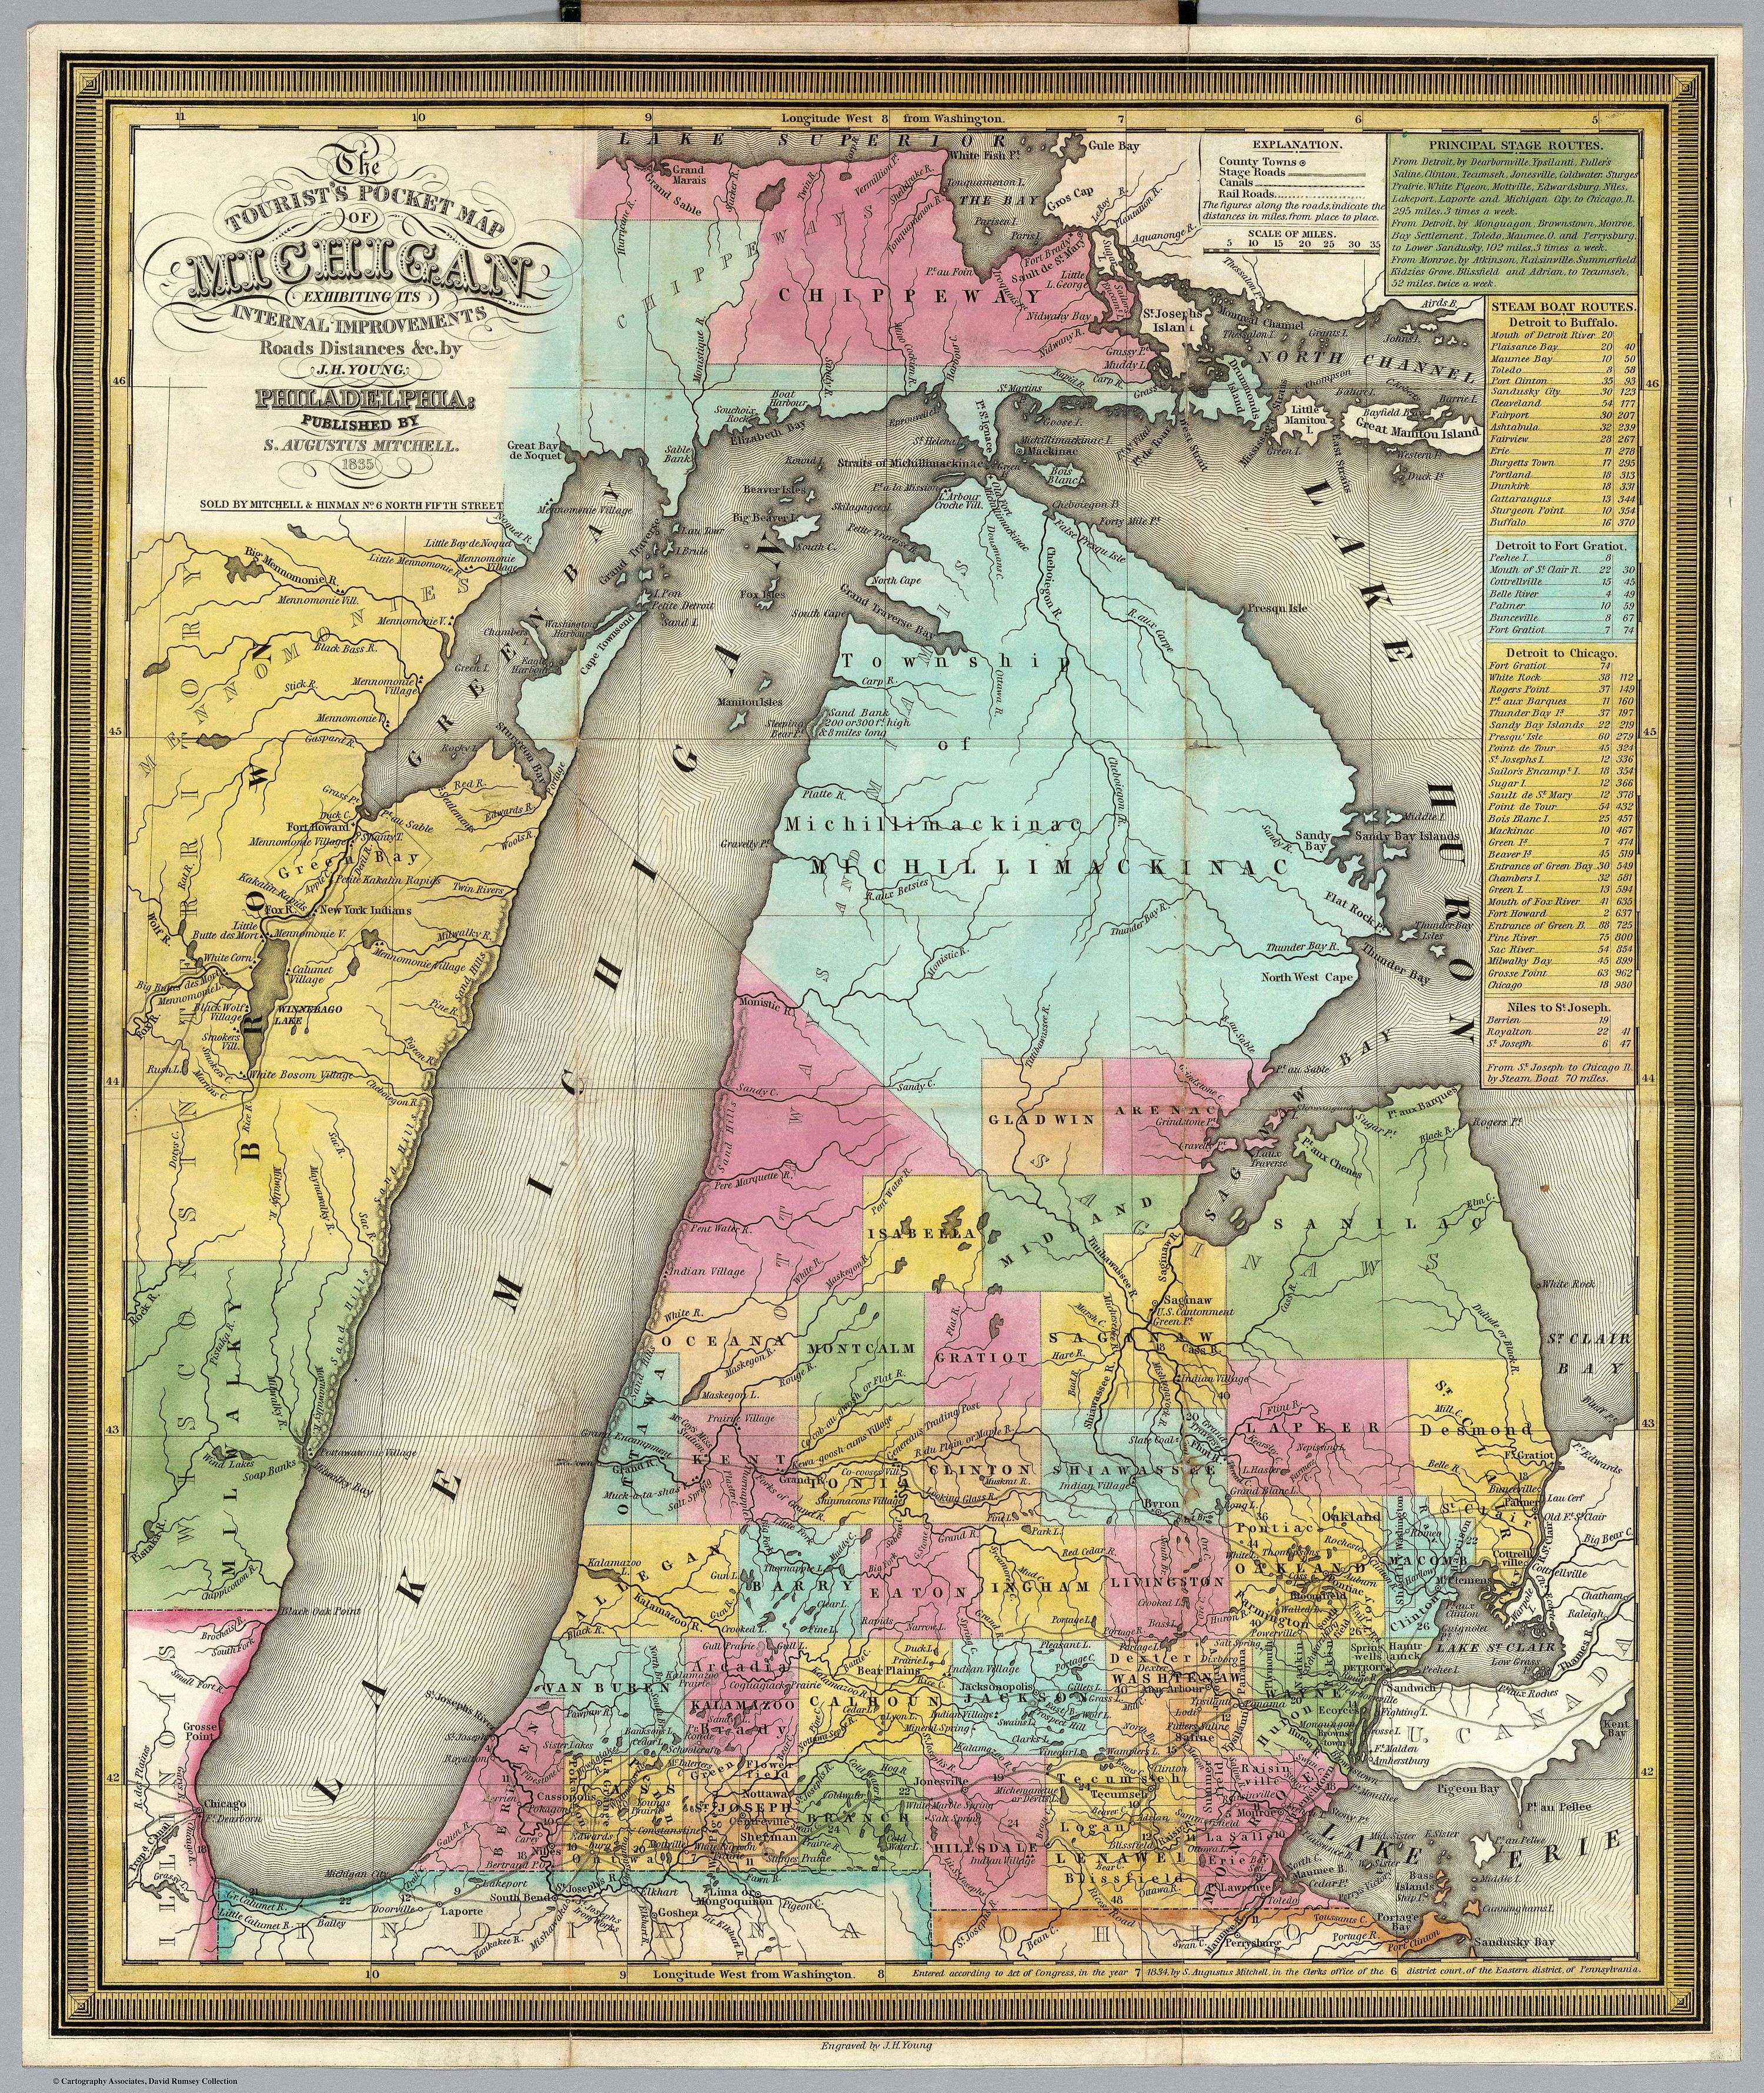 Green Bay and Lake Winnebago on the 1835 Tourist's Pocket Map of Michigan among the "Mennomonie" villages of Wisconsin Territory